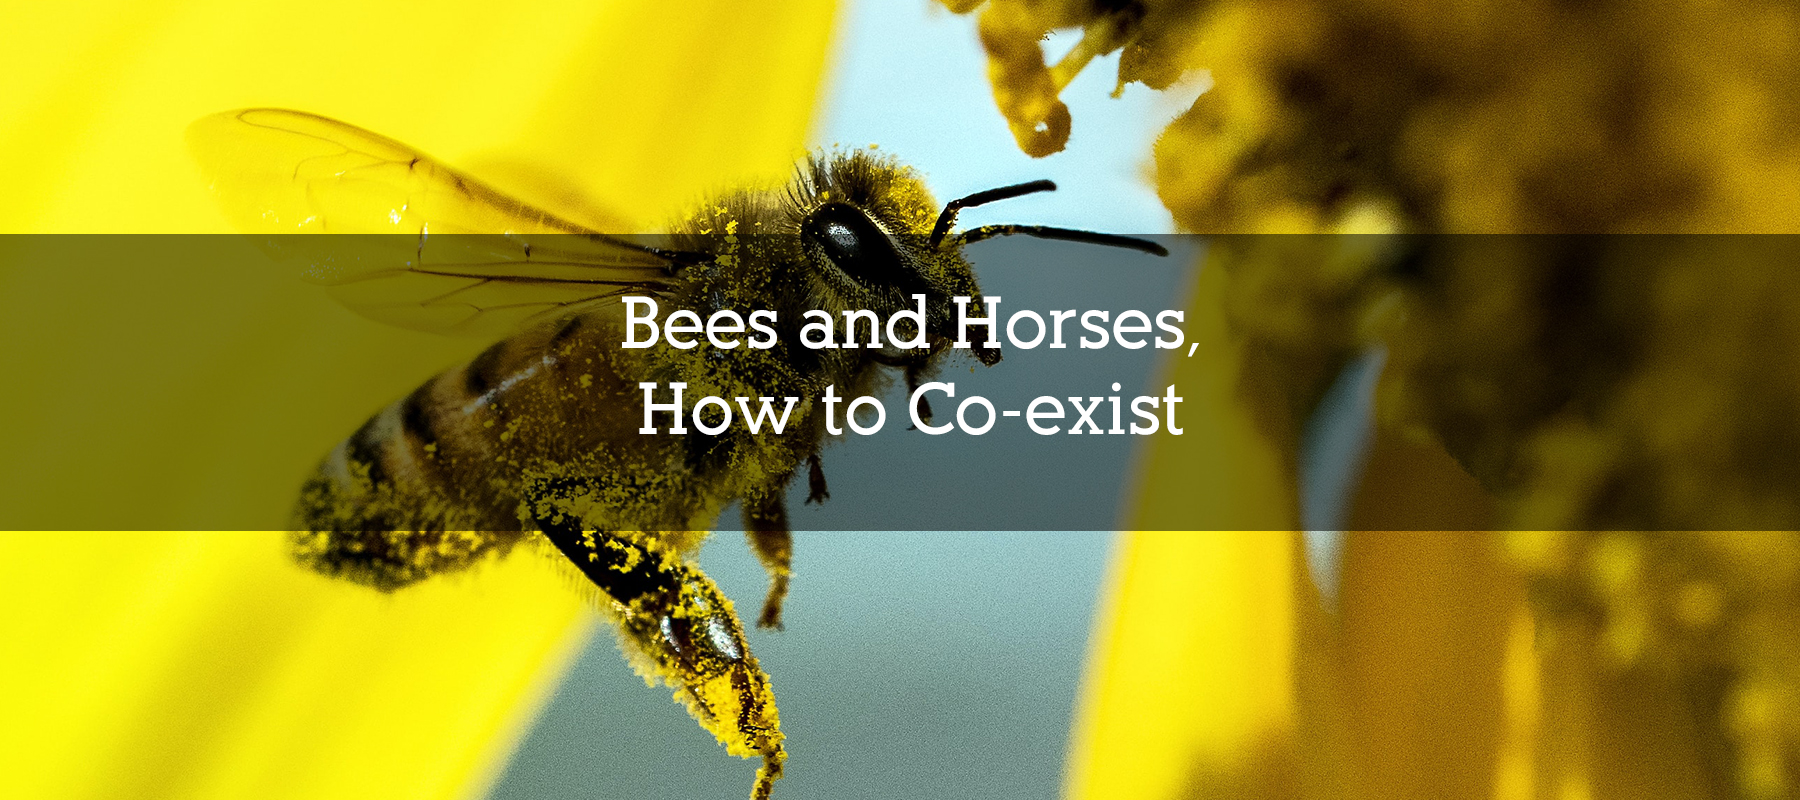 Bees and Horses - How to CoExist